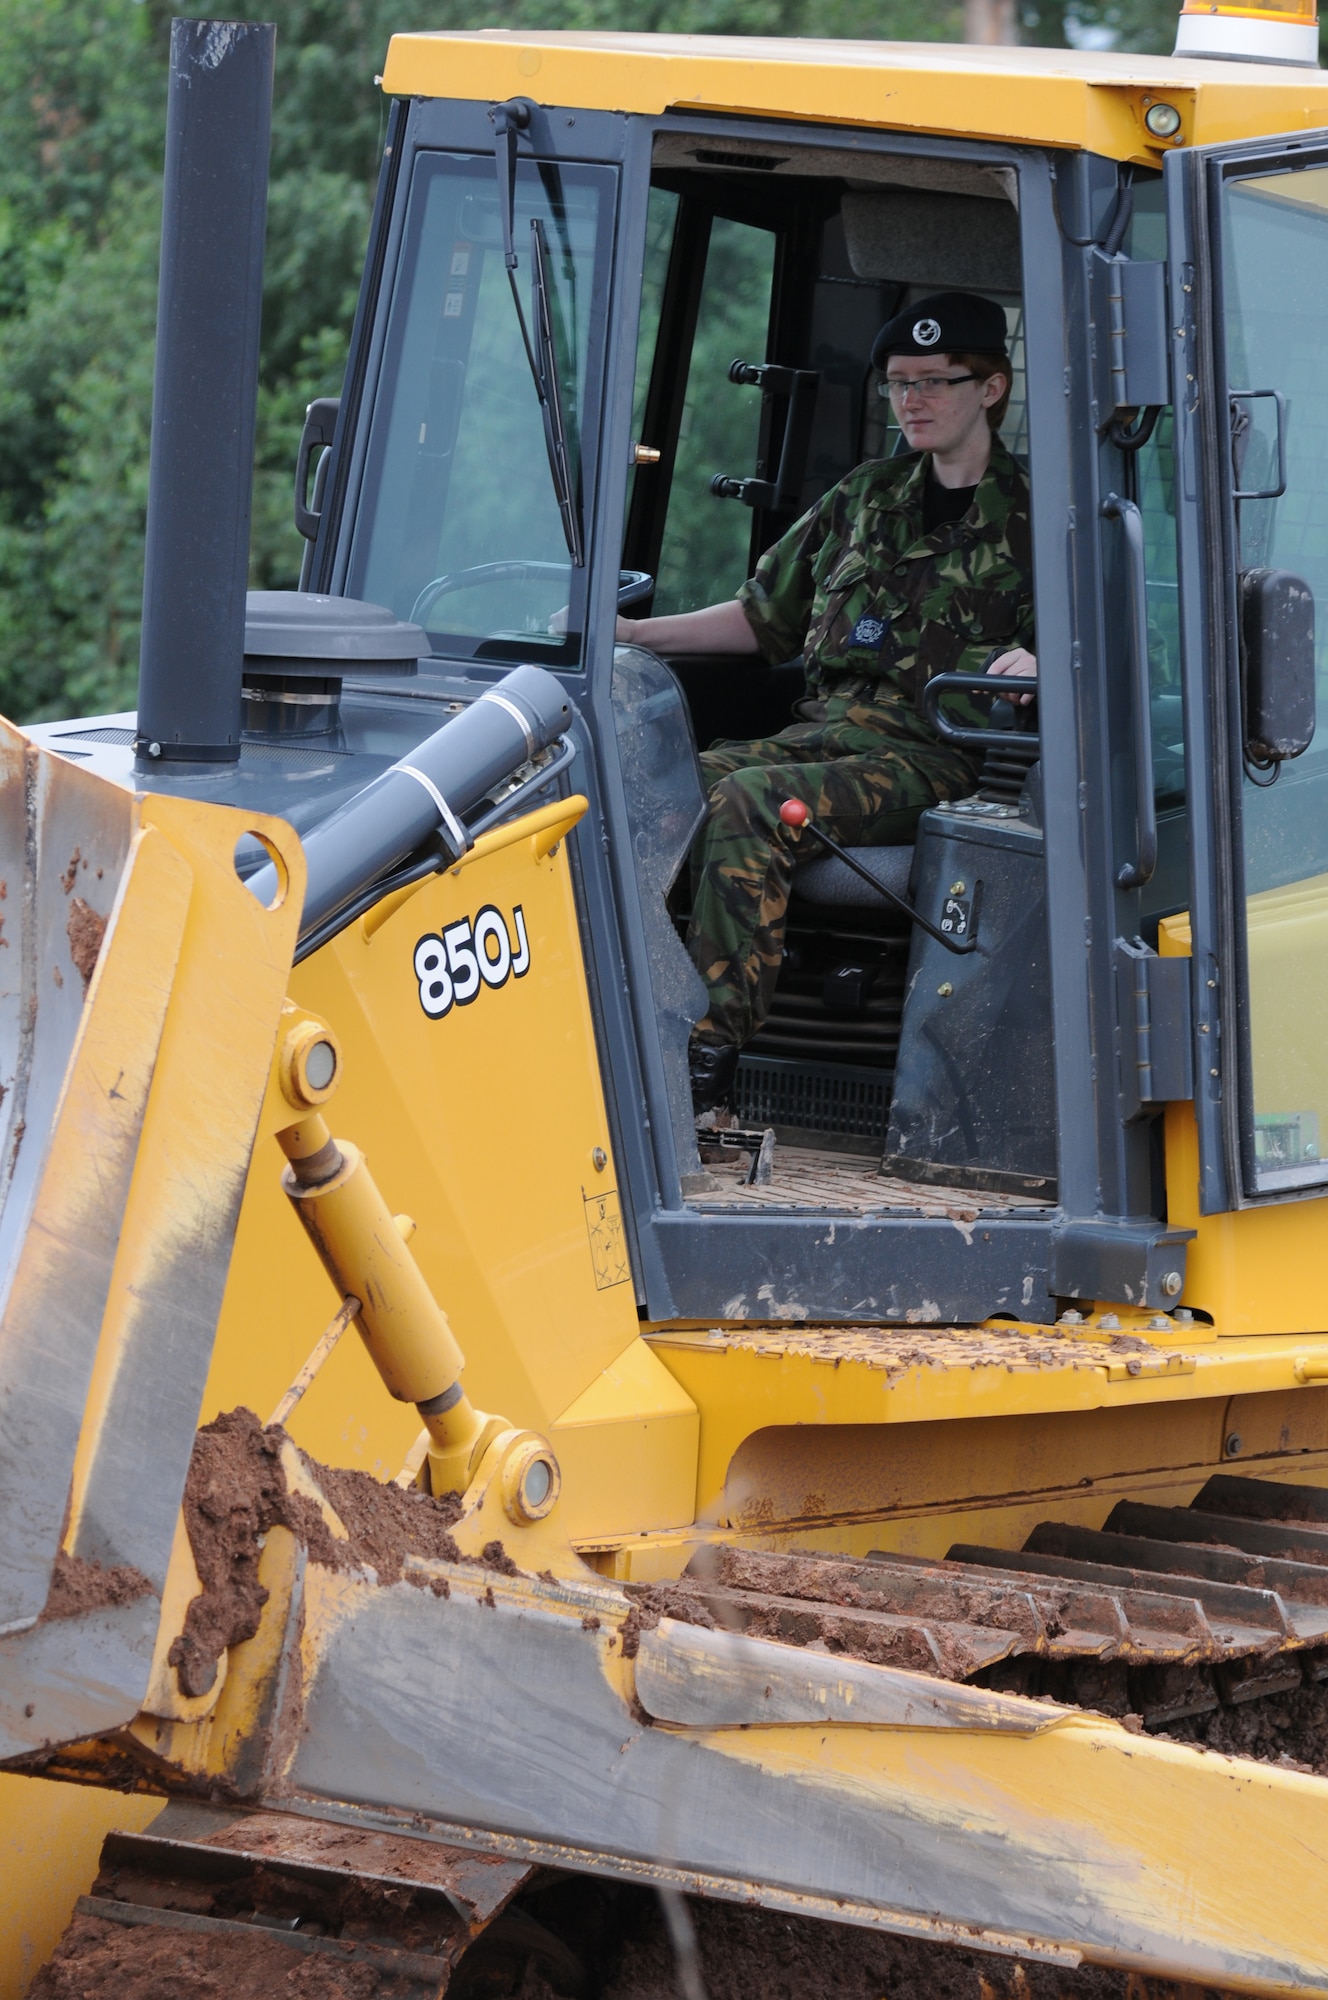 British Air Cadet Sgt. Louise Penman, Edinburgh, Scotland, operates a bulldozer during the cadet’s visit to Ramstein Air Base, Germany, July 14, 2009. Cadets visited Ramstein for a week of leadership development and contingency skills training. (U.S. Air Force photo by Airman 1st Class Caleb Pierce)